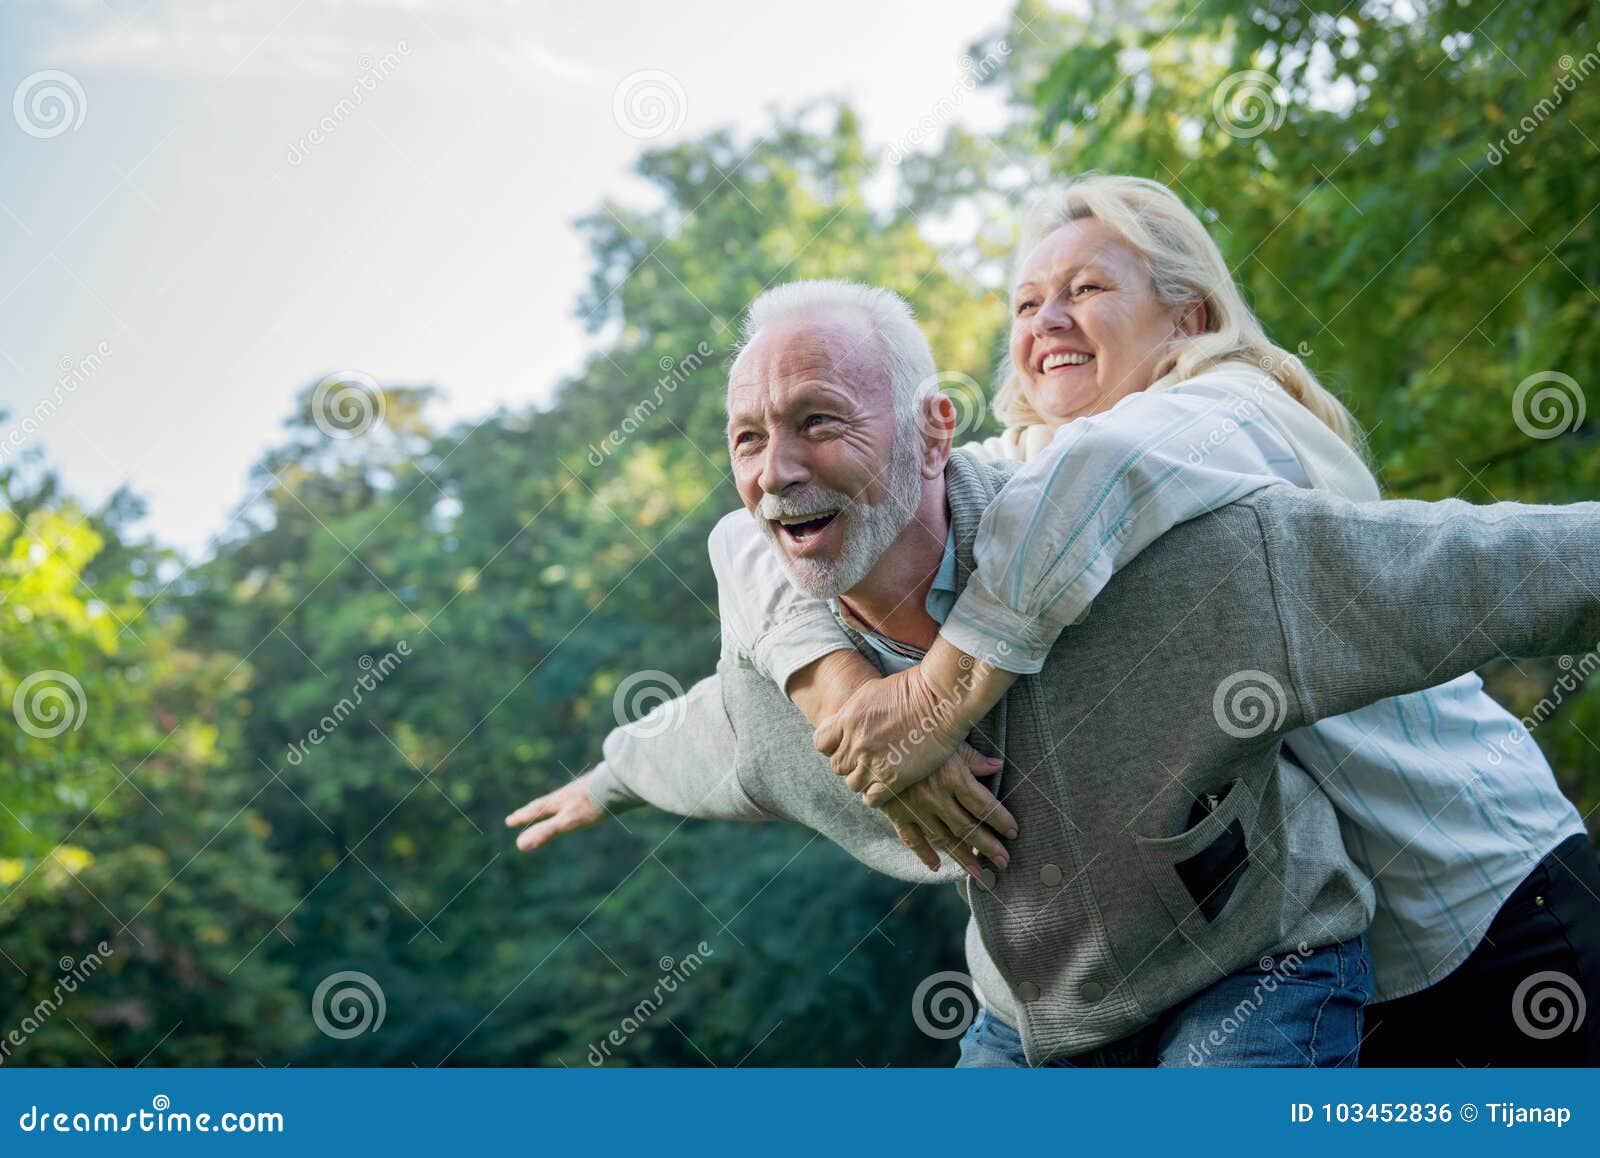 happy senior couple smiling outdoors in nature